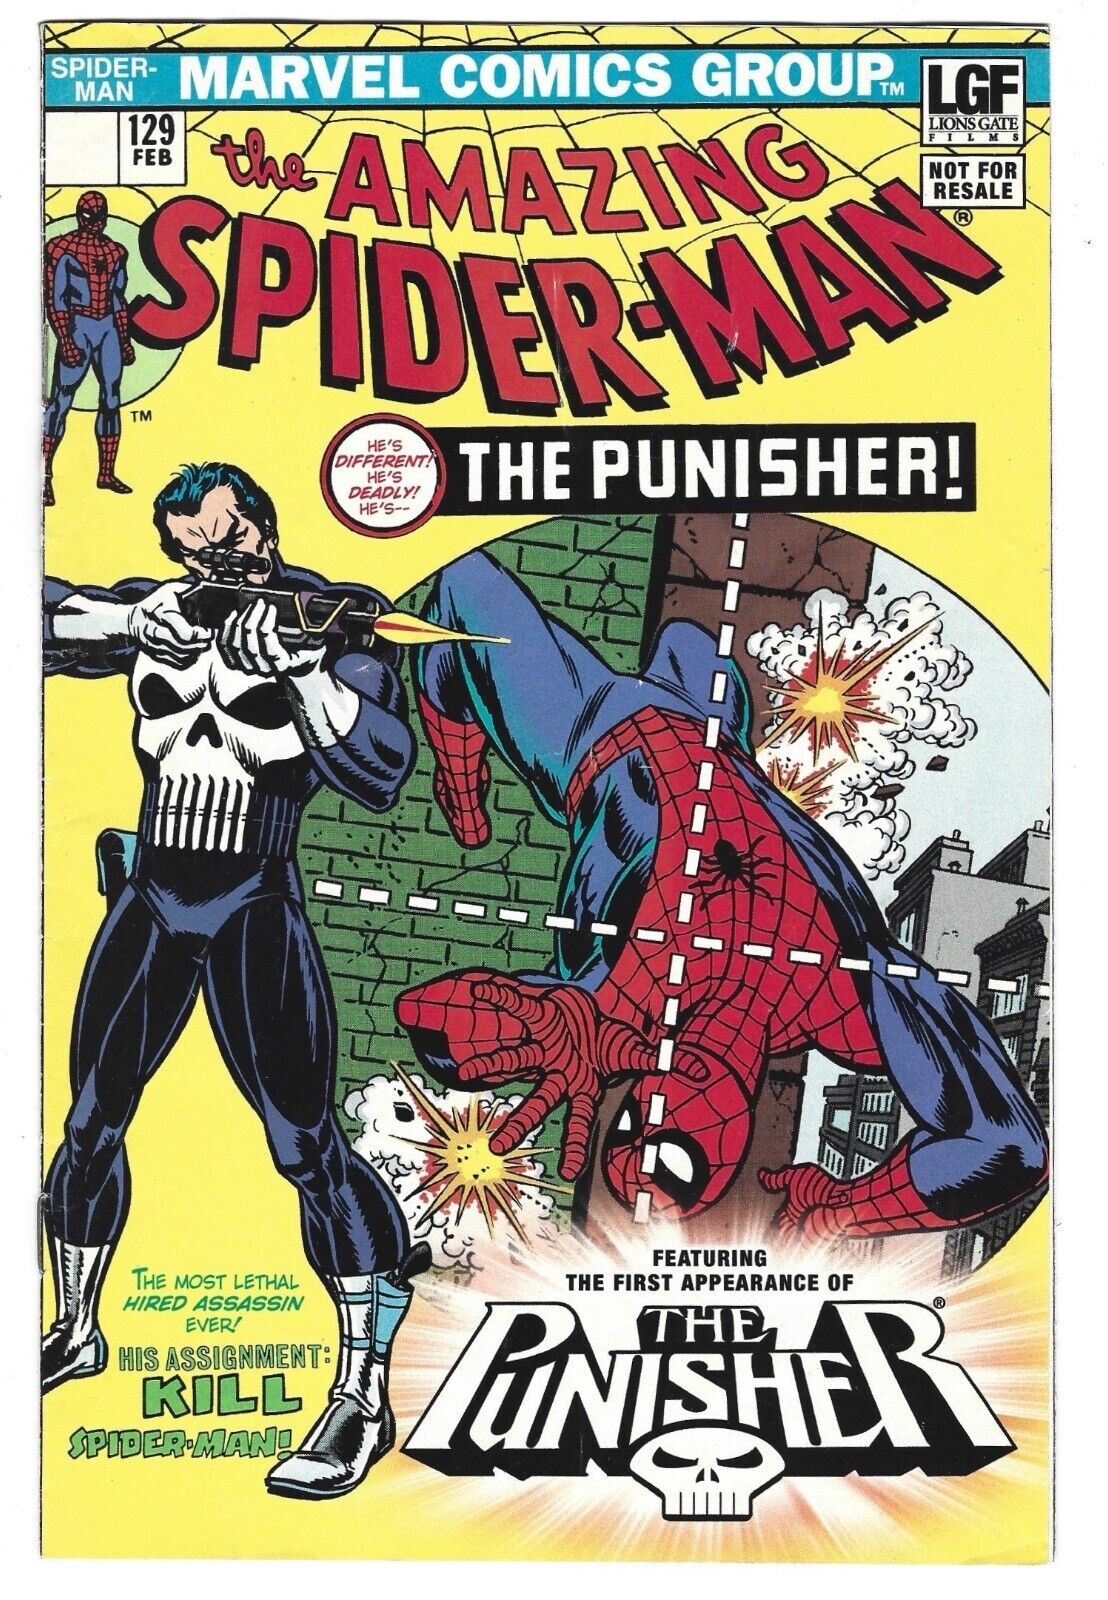 The Amazing Spider-Man #129   FEB 2004.  Fist app of Punisher, lionsgate reprint